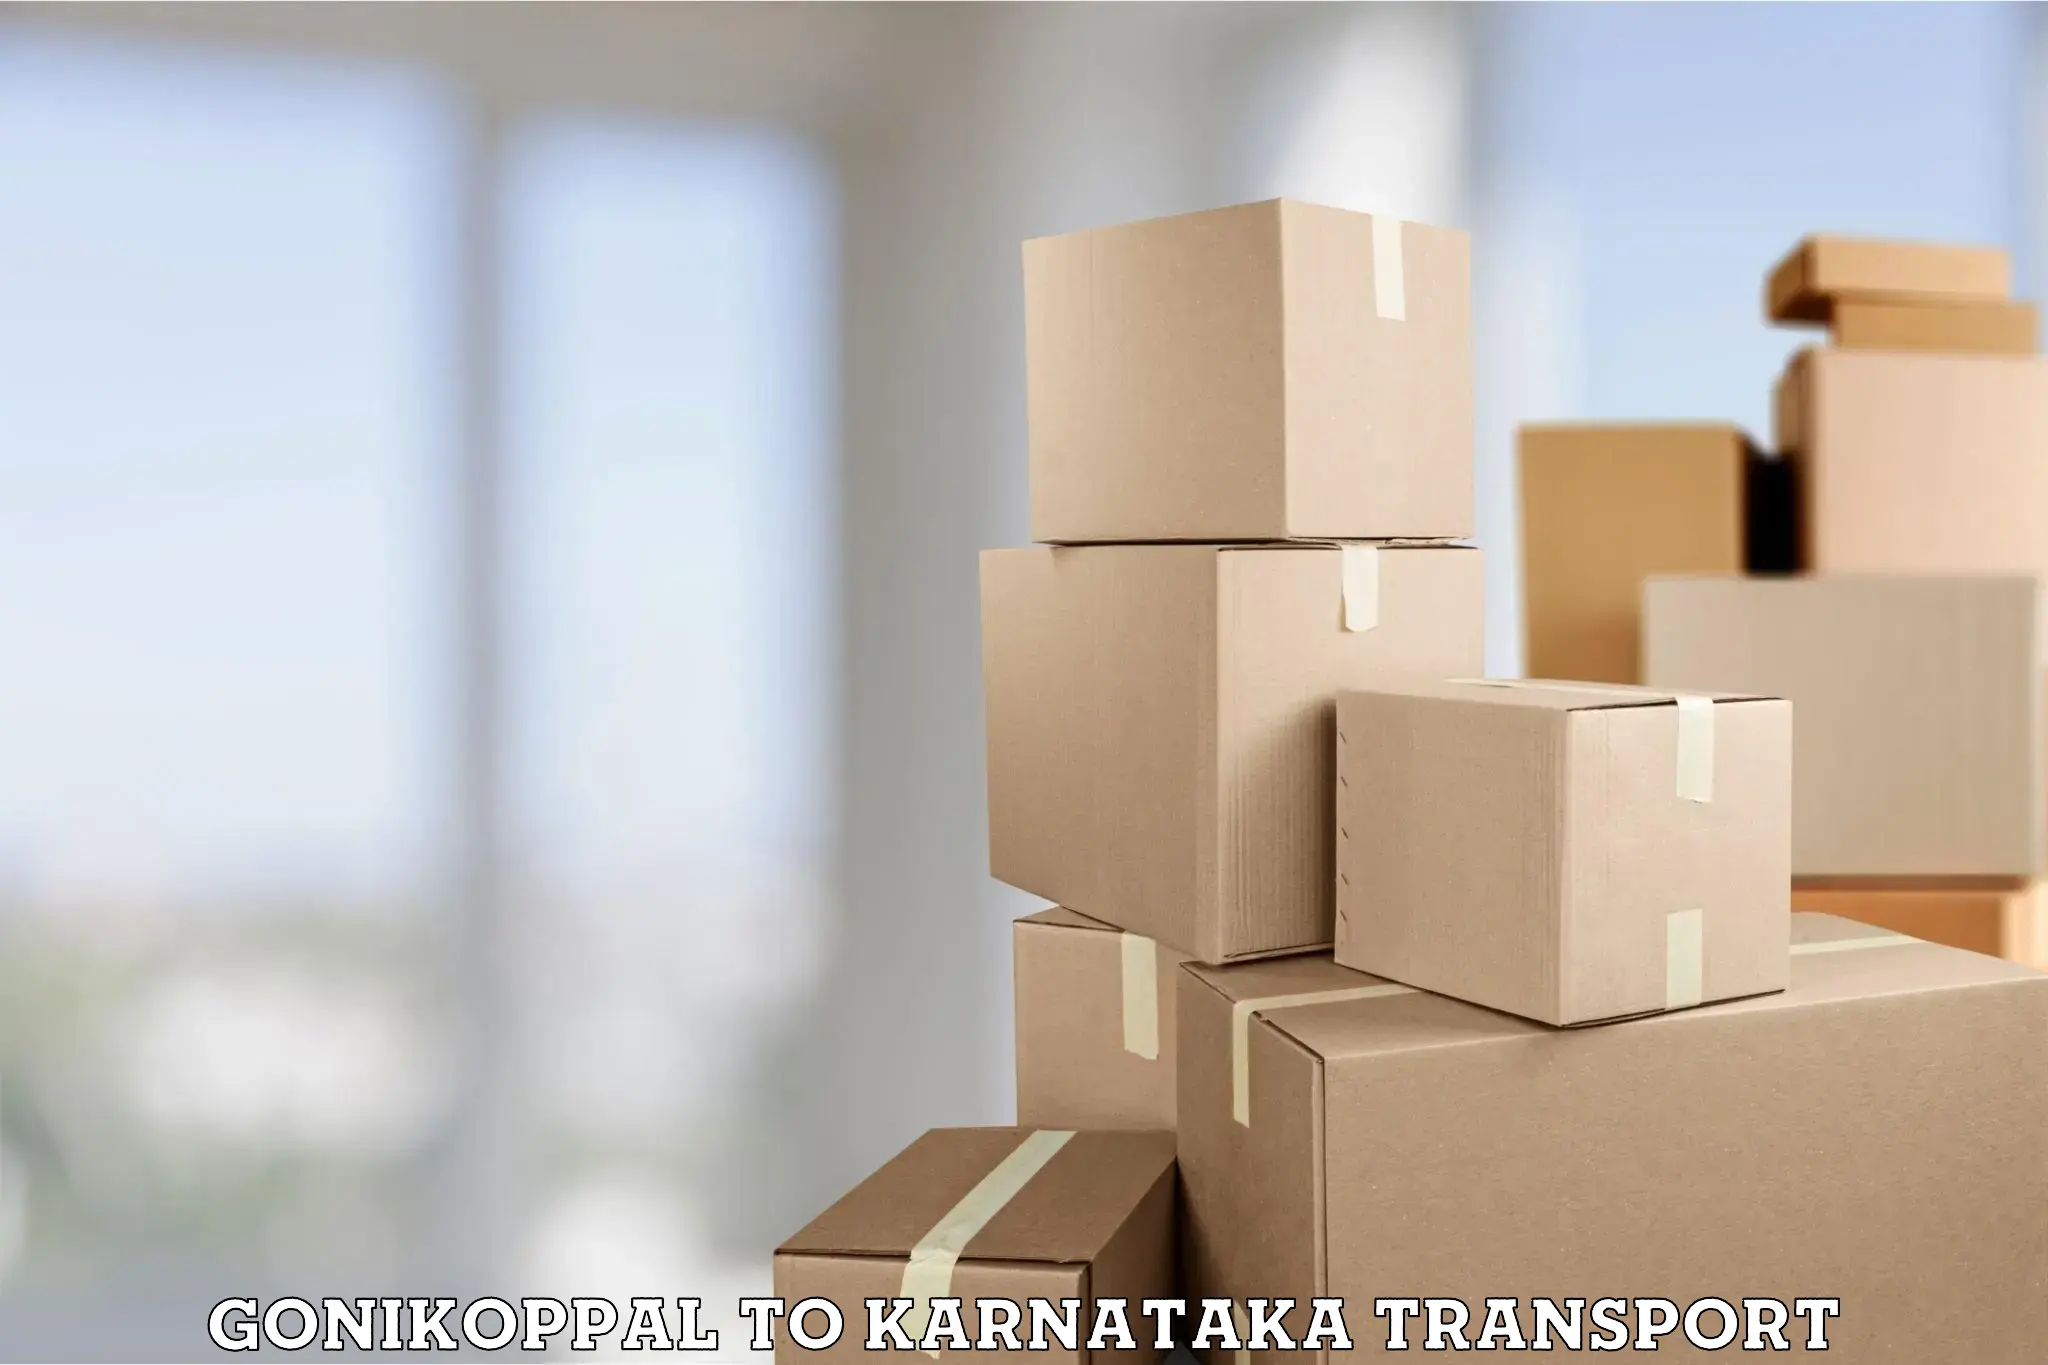 Goods delivery service Gonikoppal to Manipal Academy of Higher Education